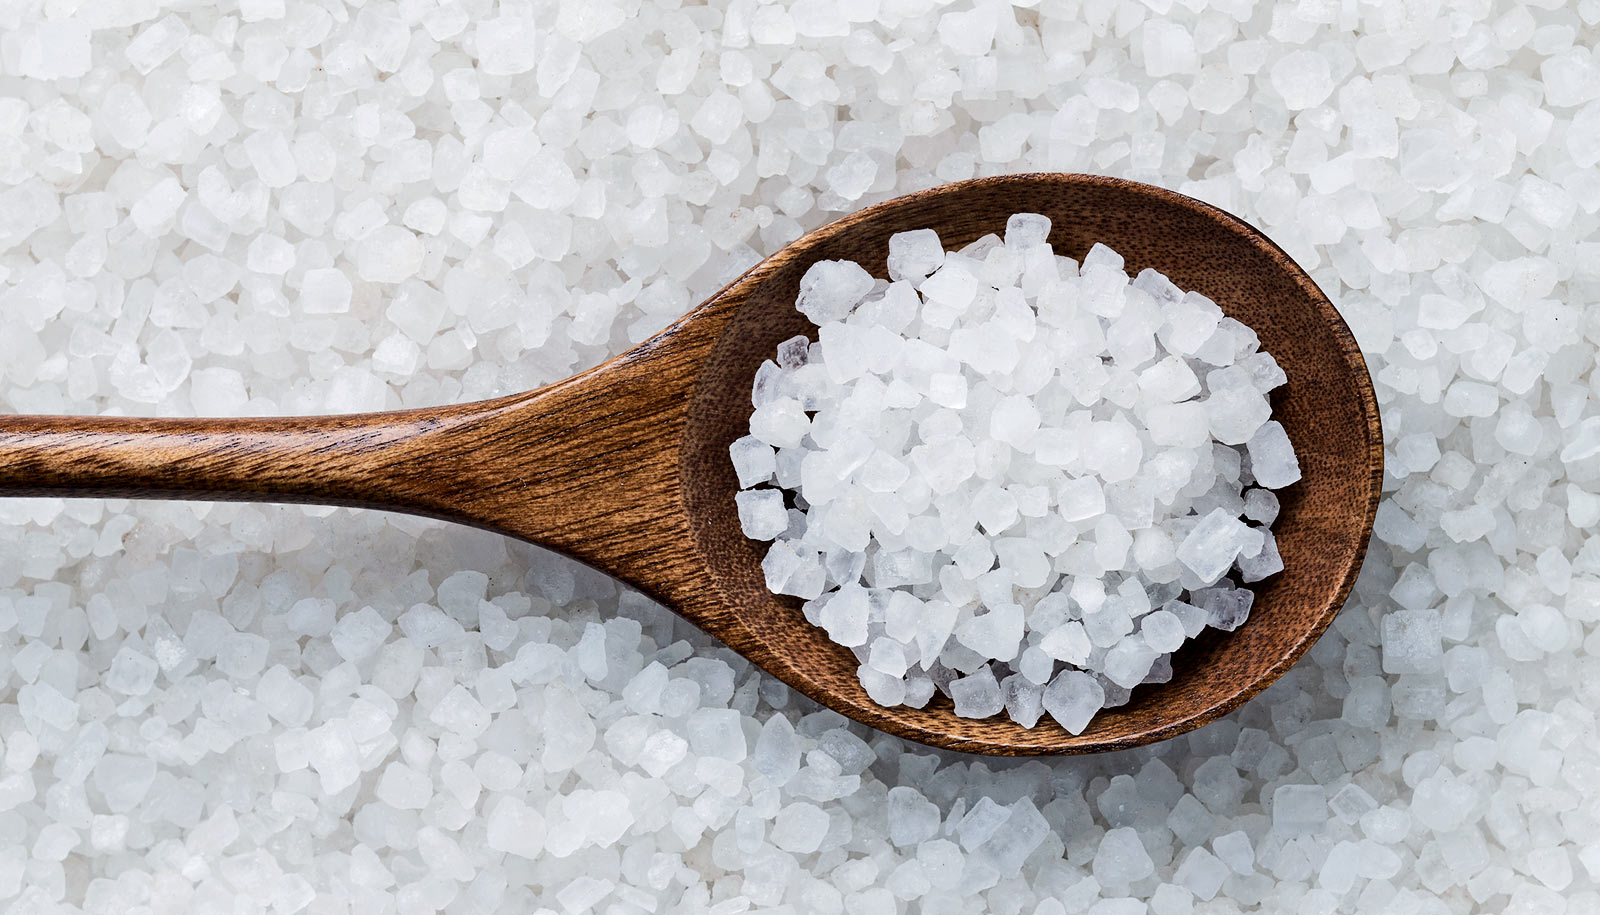 Control your salt intake in your daily life